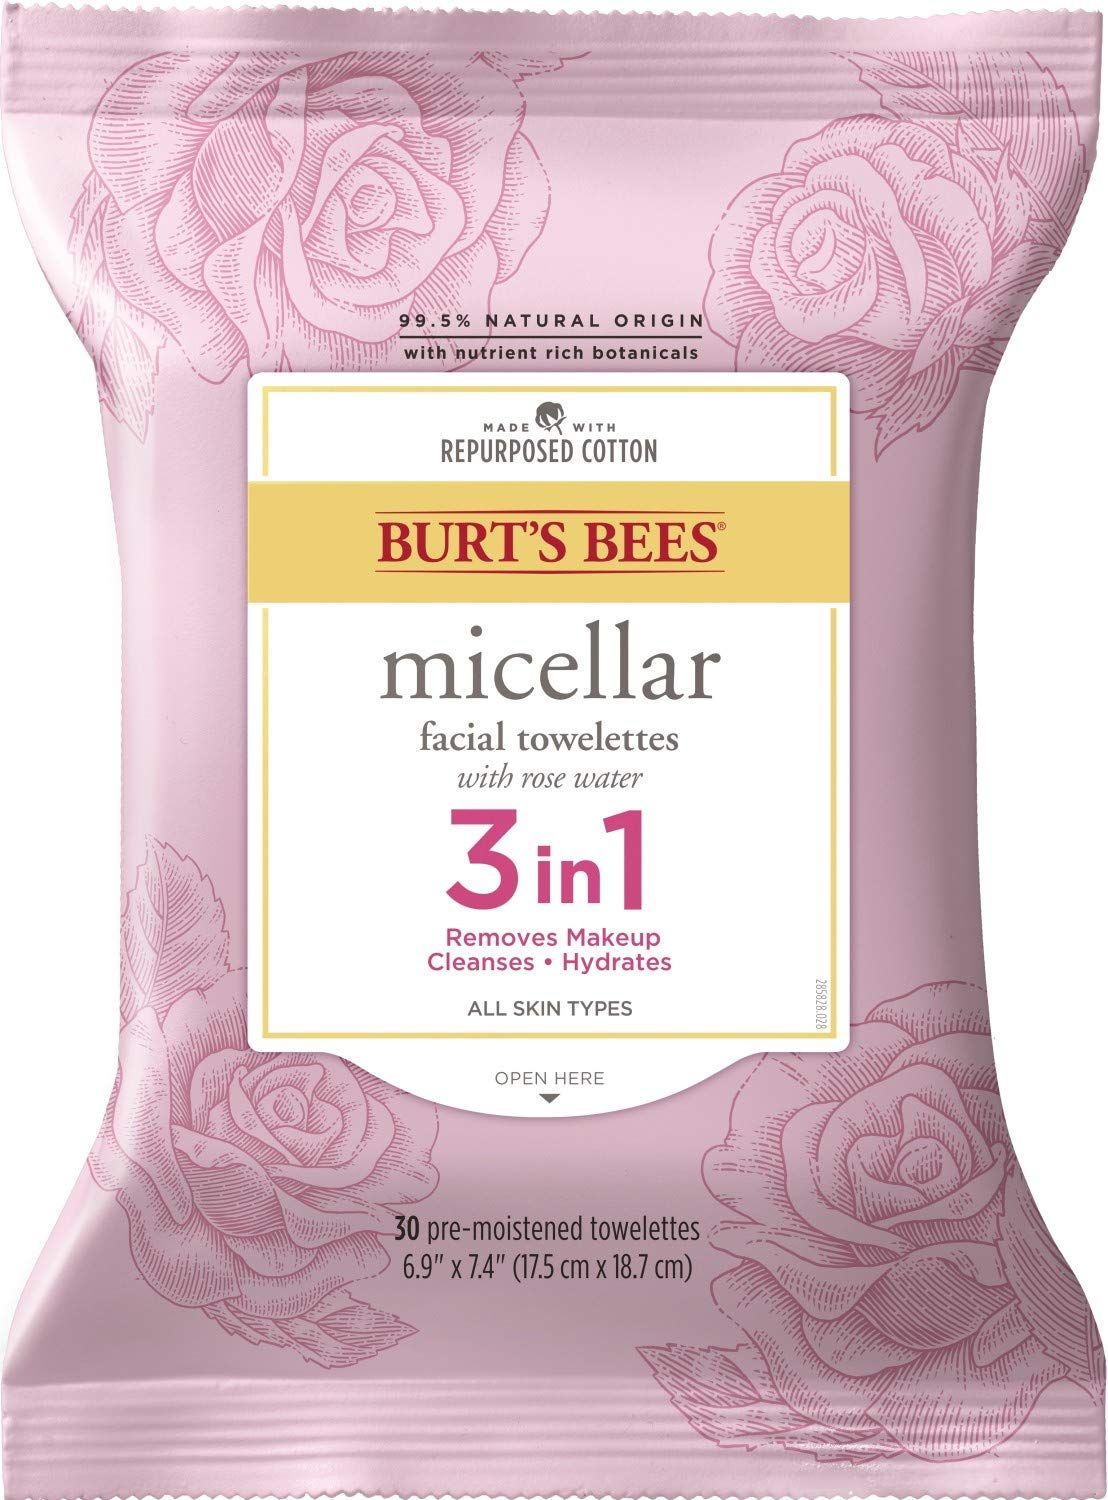 DISCBurt’s Bees® 3 in 1 Micellar Facial Cleanser Towelettes & Makeup Remover Wipes with Rose Water - 30 ct